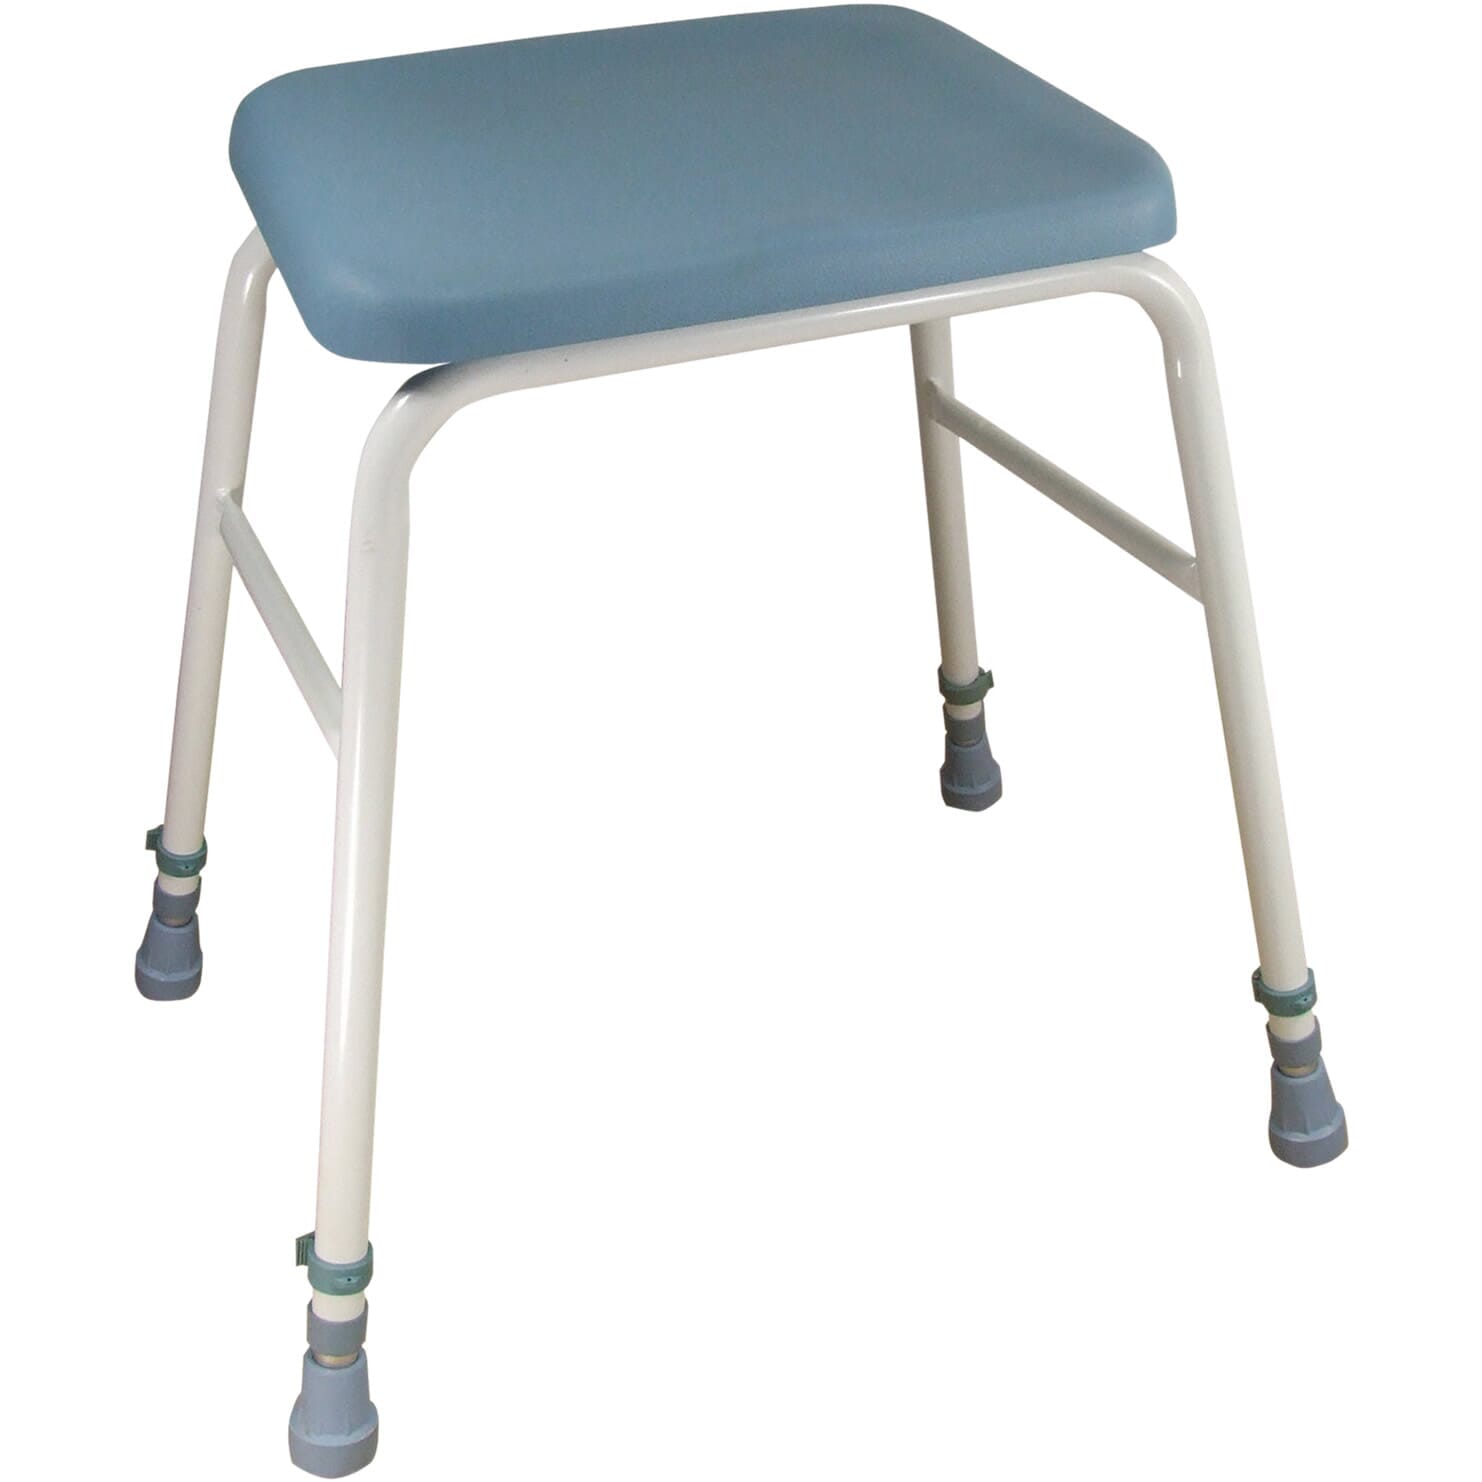 View Comfy Padded Perching Stool Stool only information